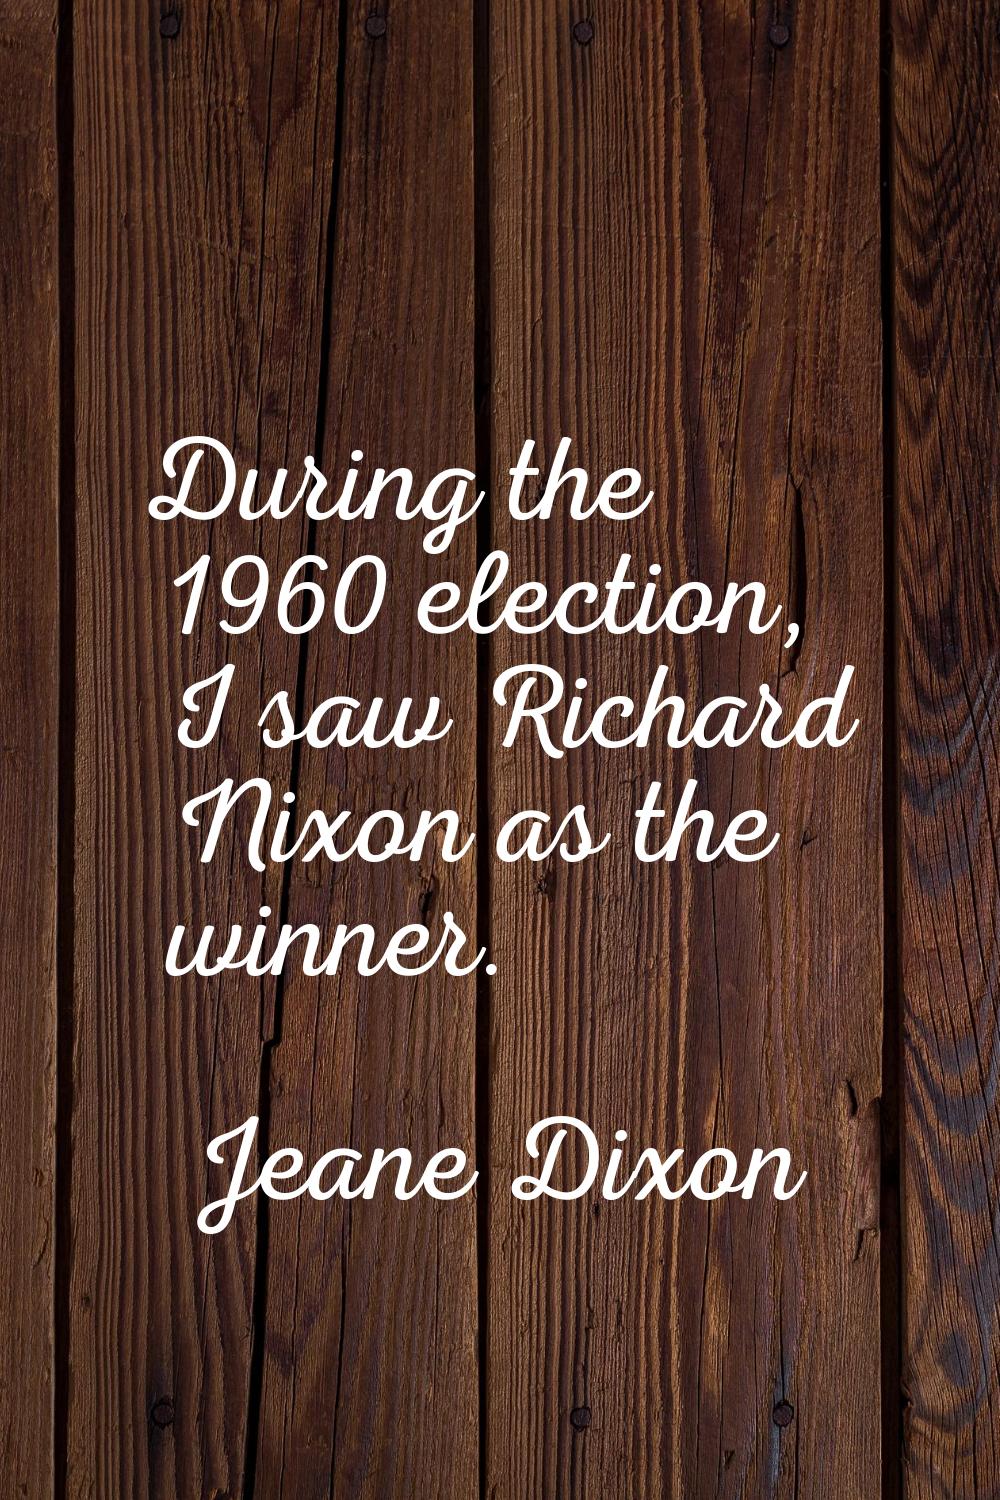 During the 1960 election, I saw Richard Nixon as the winner.